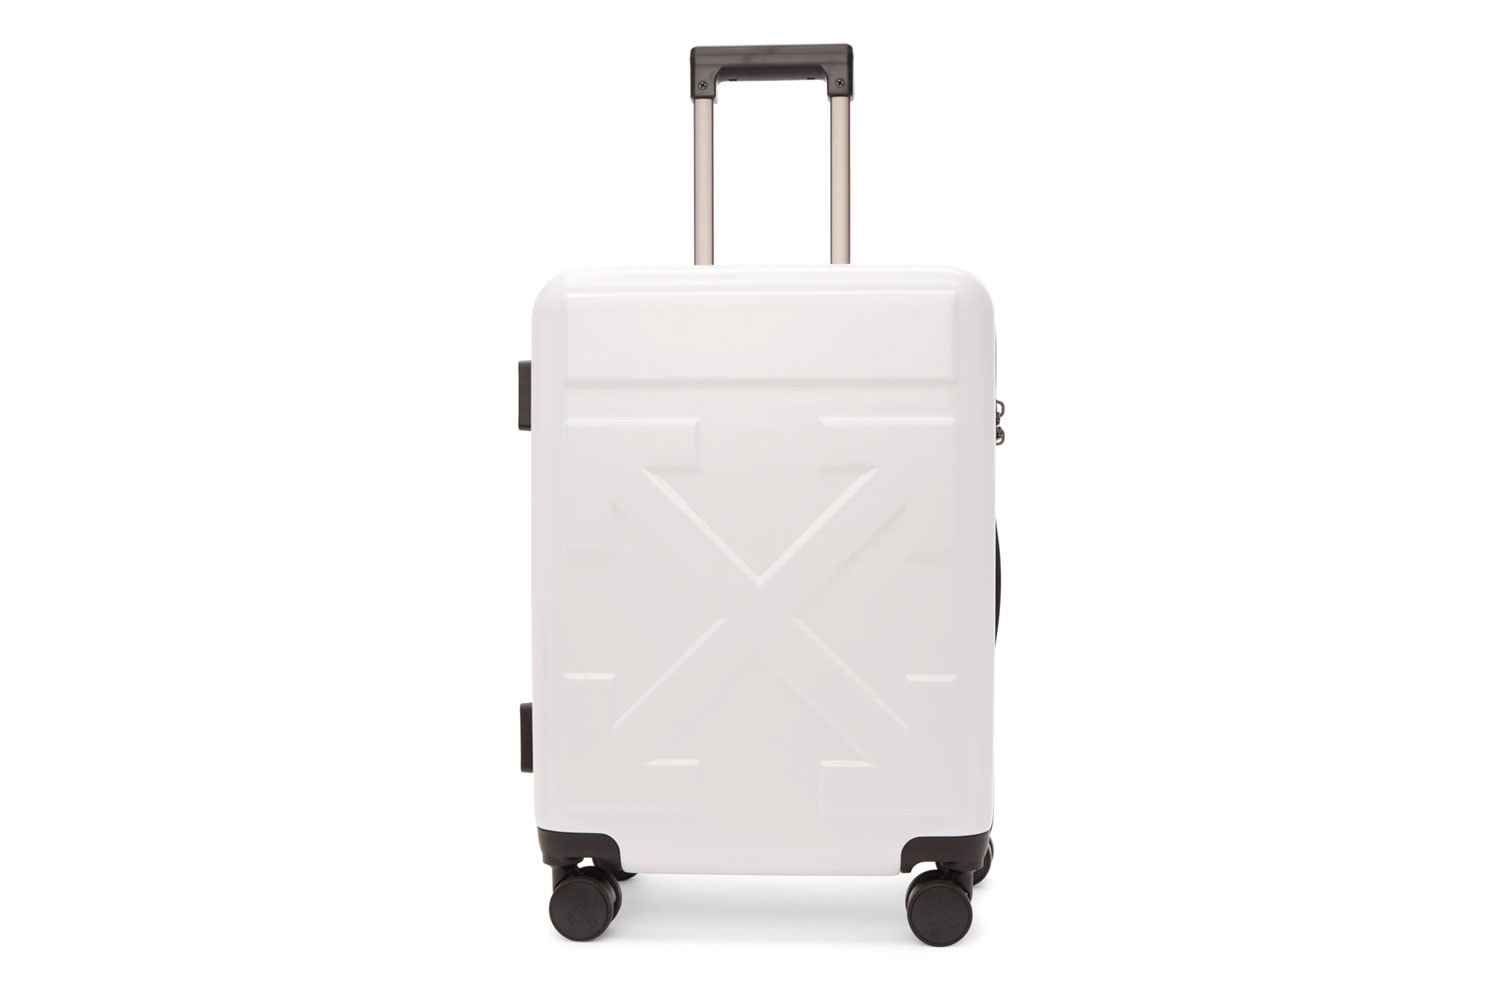 RIMOWA とのコラボレーションも記憶に新しい Off-White™️ が オリジナルのスーツケース3型をリリース Off-White Arrows Suitcase Release SSENSE Suitcases Luggage 